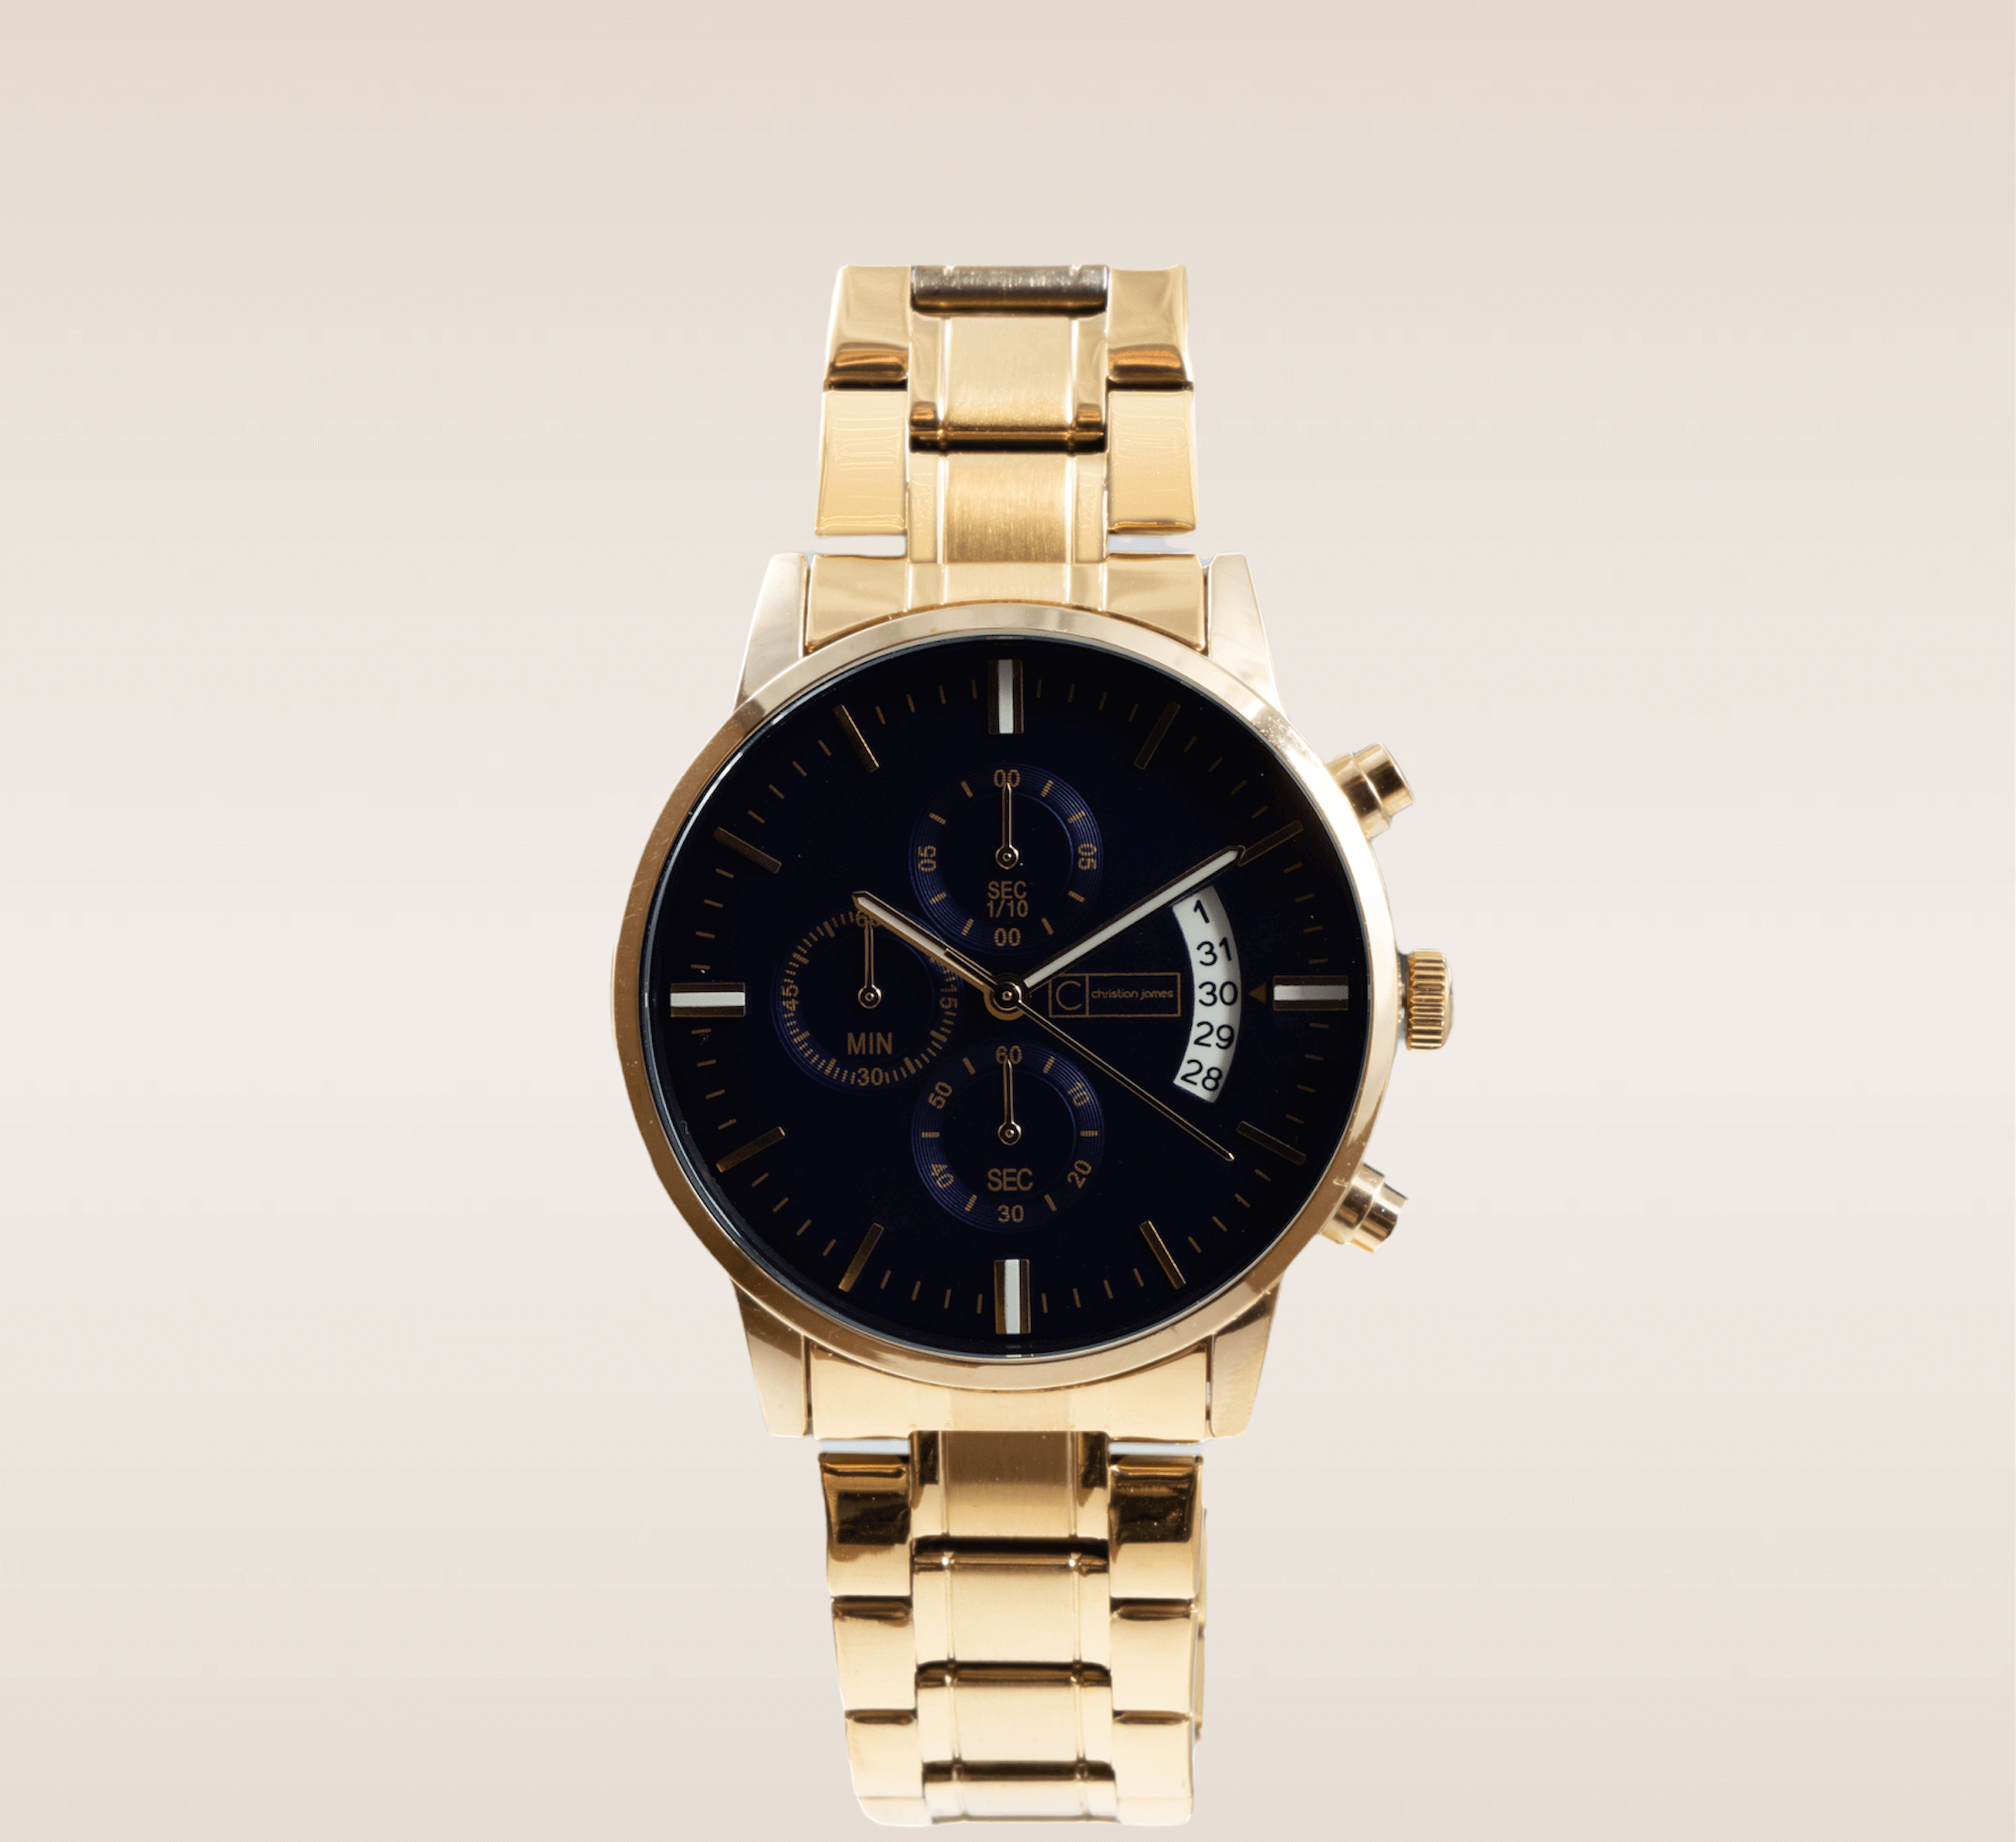 In this up-close shot, we are presented with the captivating Varsity Timepiece, a symbol of elegance and precision. The watch features a stunning gold link bracelet that wraps around the wrist, exuding a sense of luxury and sophistication. The deep blue watch face provides a striking contrast against the gold, creating a bold and timeless aesthetic. The face is carefully designed with clear and legible markers, allowing for easy time reading. The sleek golden watch hands glide effortlessly across the face, marking the passage of time with grace. 